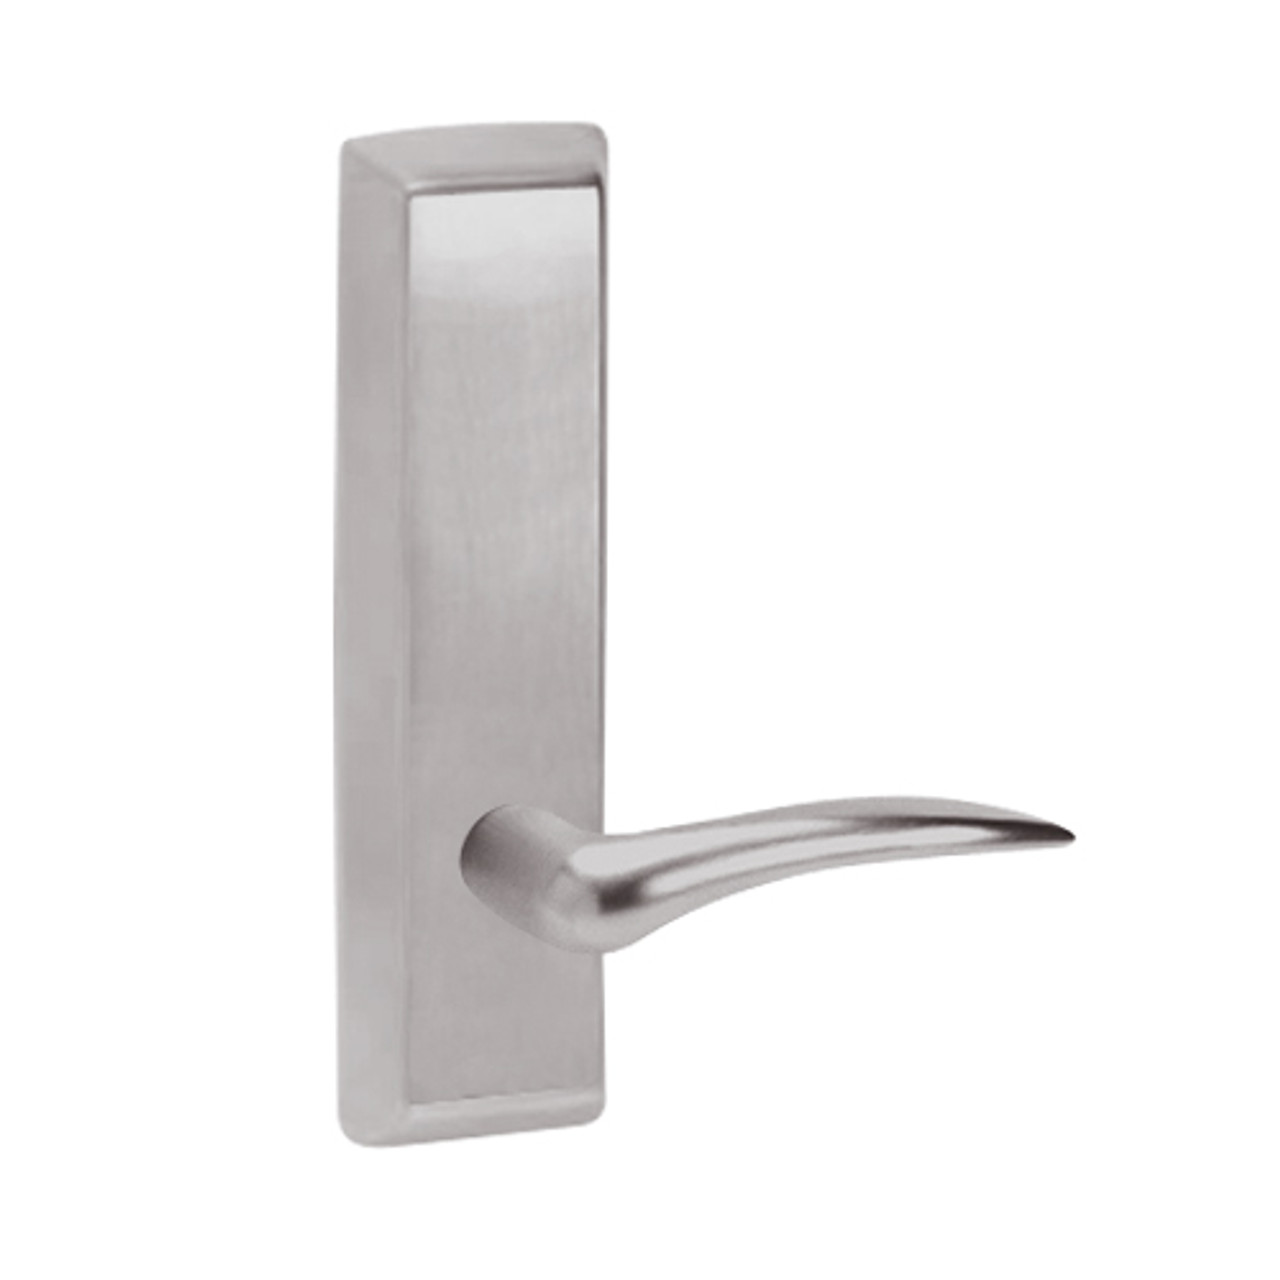 D955-630-LHR Corbin ED5000 Series Exit Device Trim with Classroom Dirke Lever in Satin Stainless Steel Finish